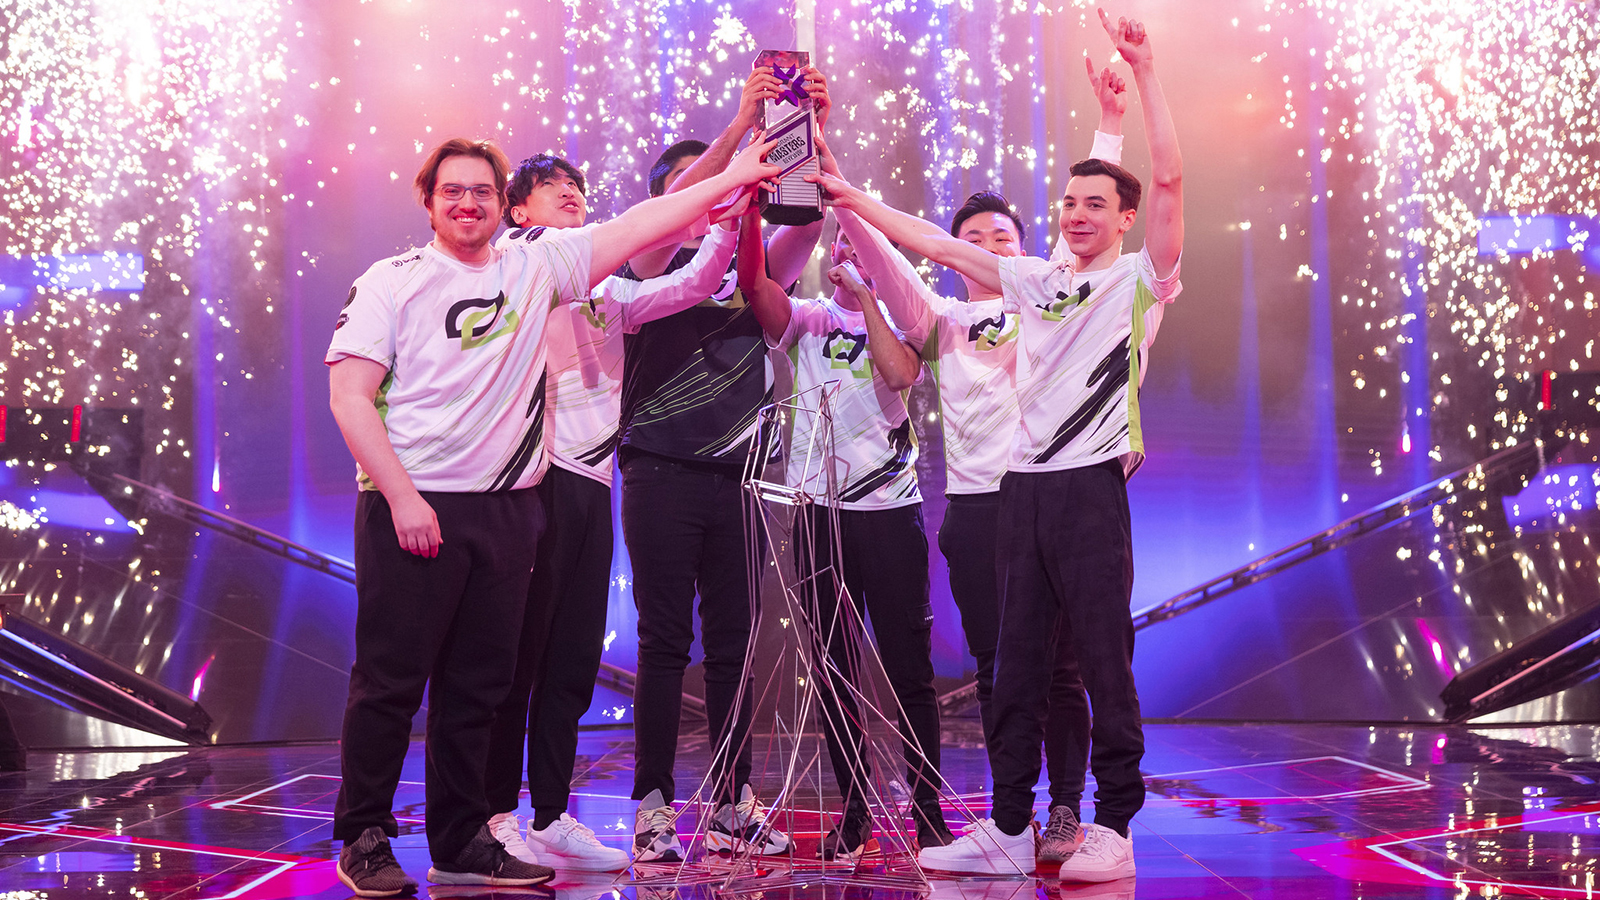 VALORANT Esports 2022 Recap: Check out All Noteworthy Moments from Valorant Champions Tour 2022